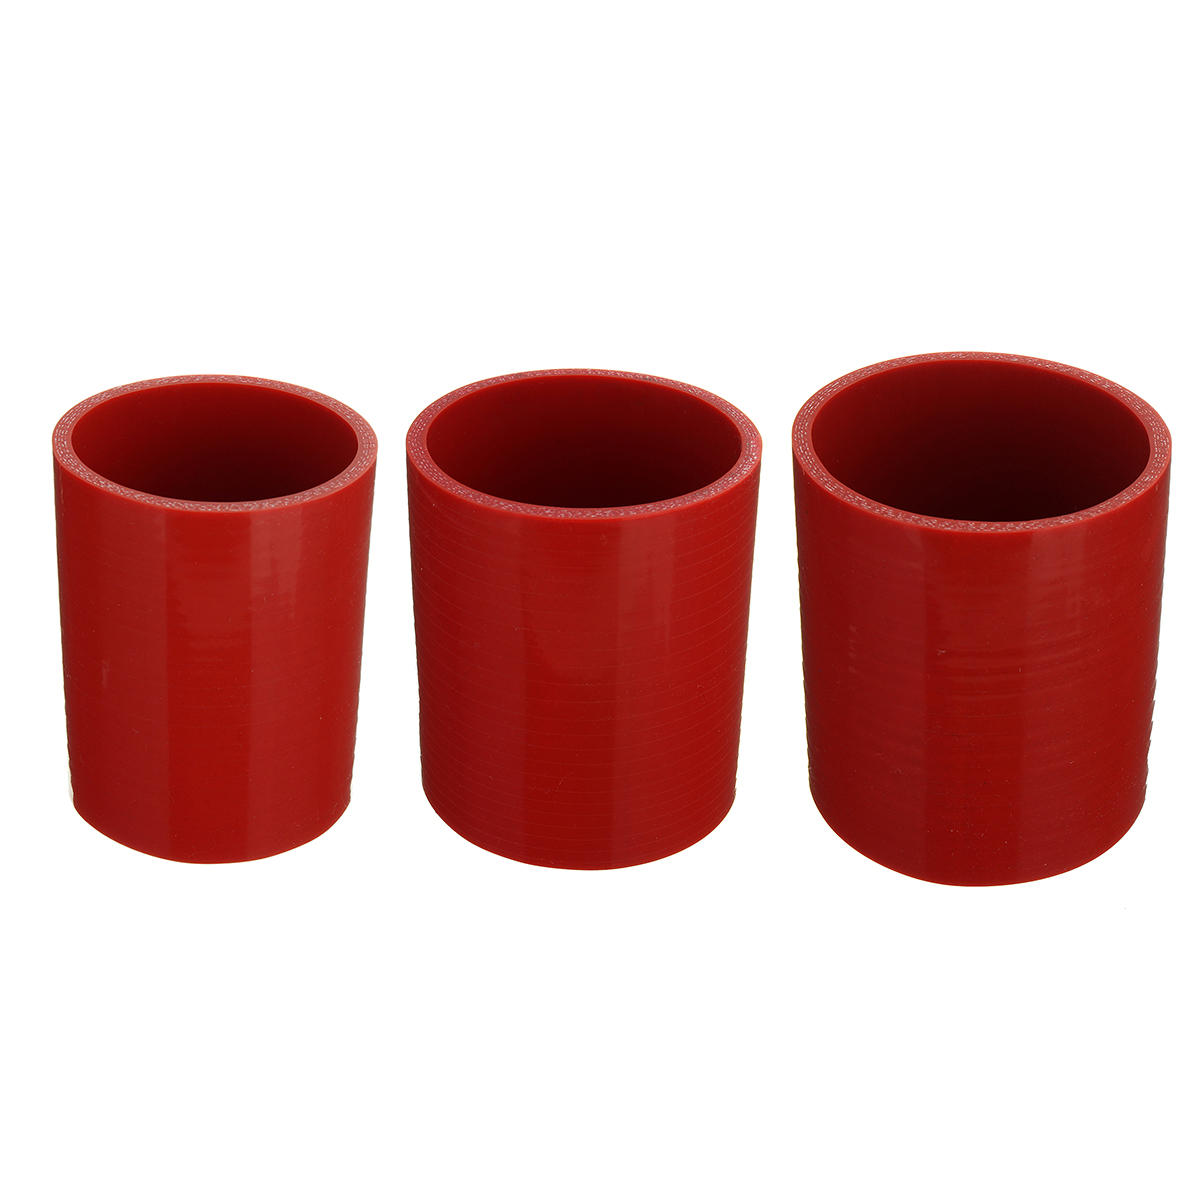 100mm Straight Silicone Hose Coupling Connector Silicon Rubber Tube Joiner Pipe Ash COD